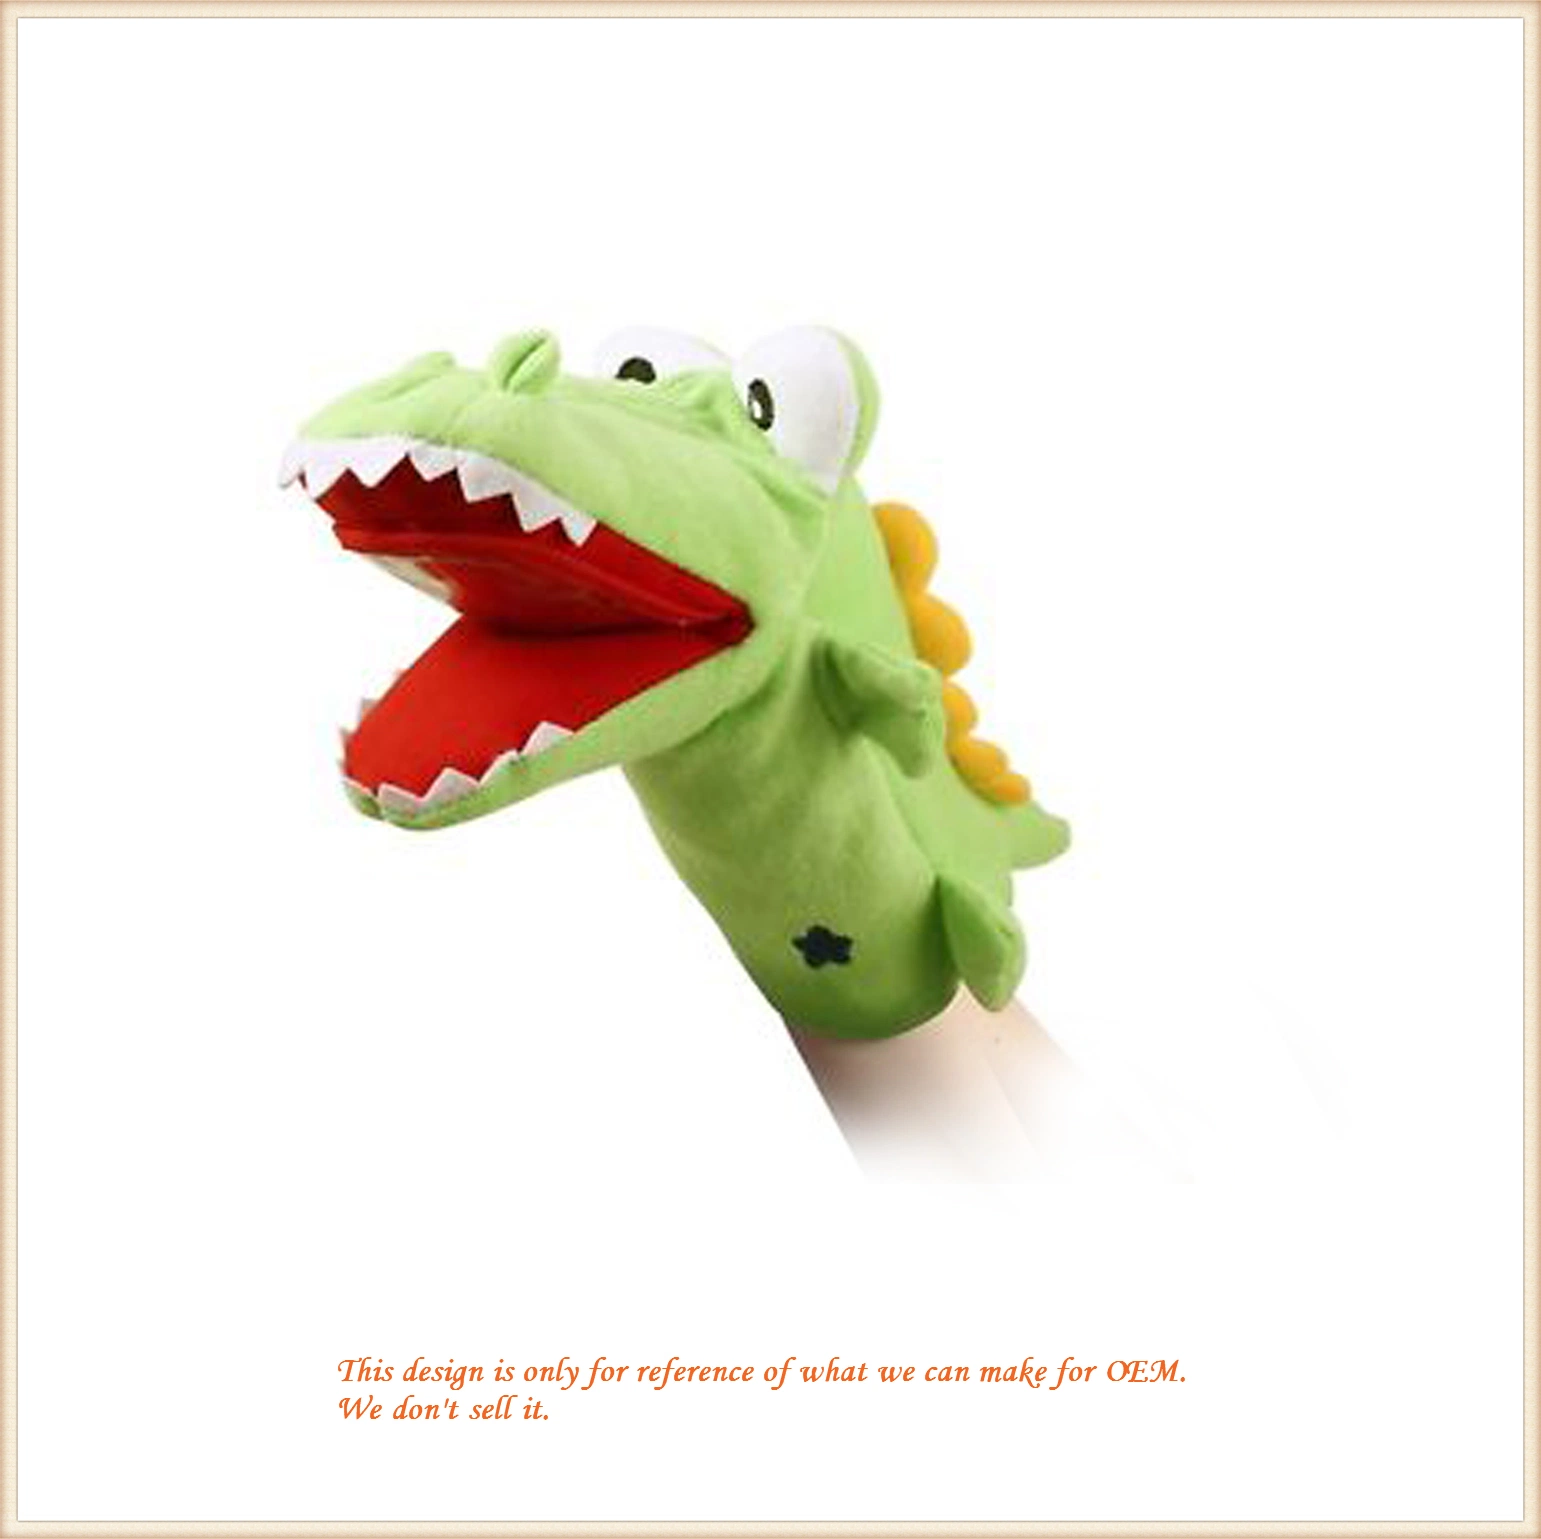 Plush Cute Animal/Customizable/Soft /Stuffed/Funny Crocodile Hand Puppet Toys for Educational/Gift/Promotion/Children/Kids